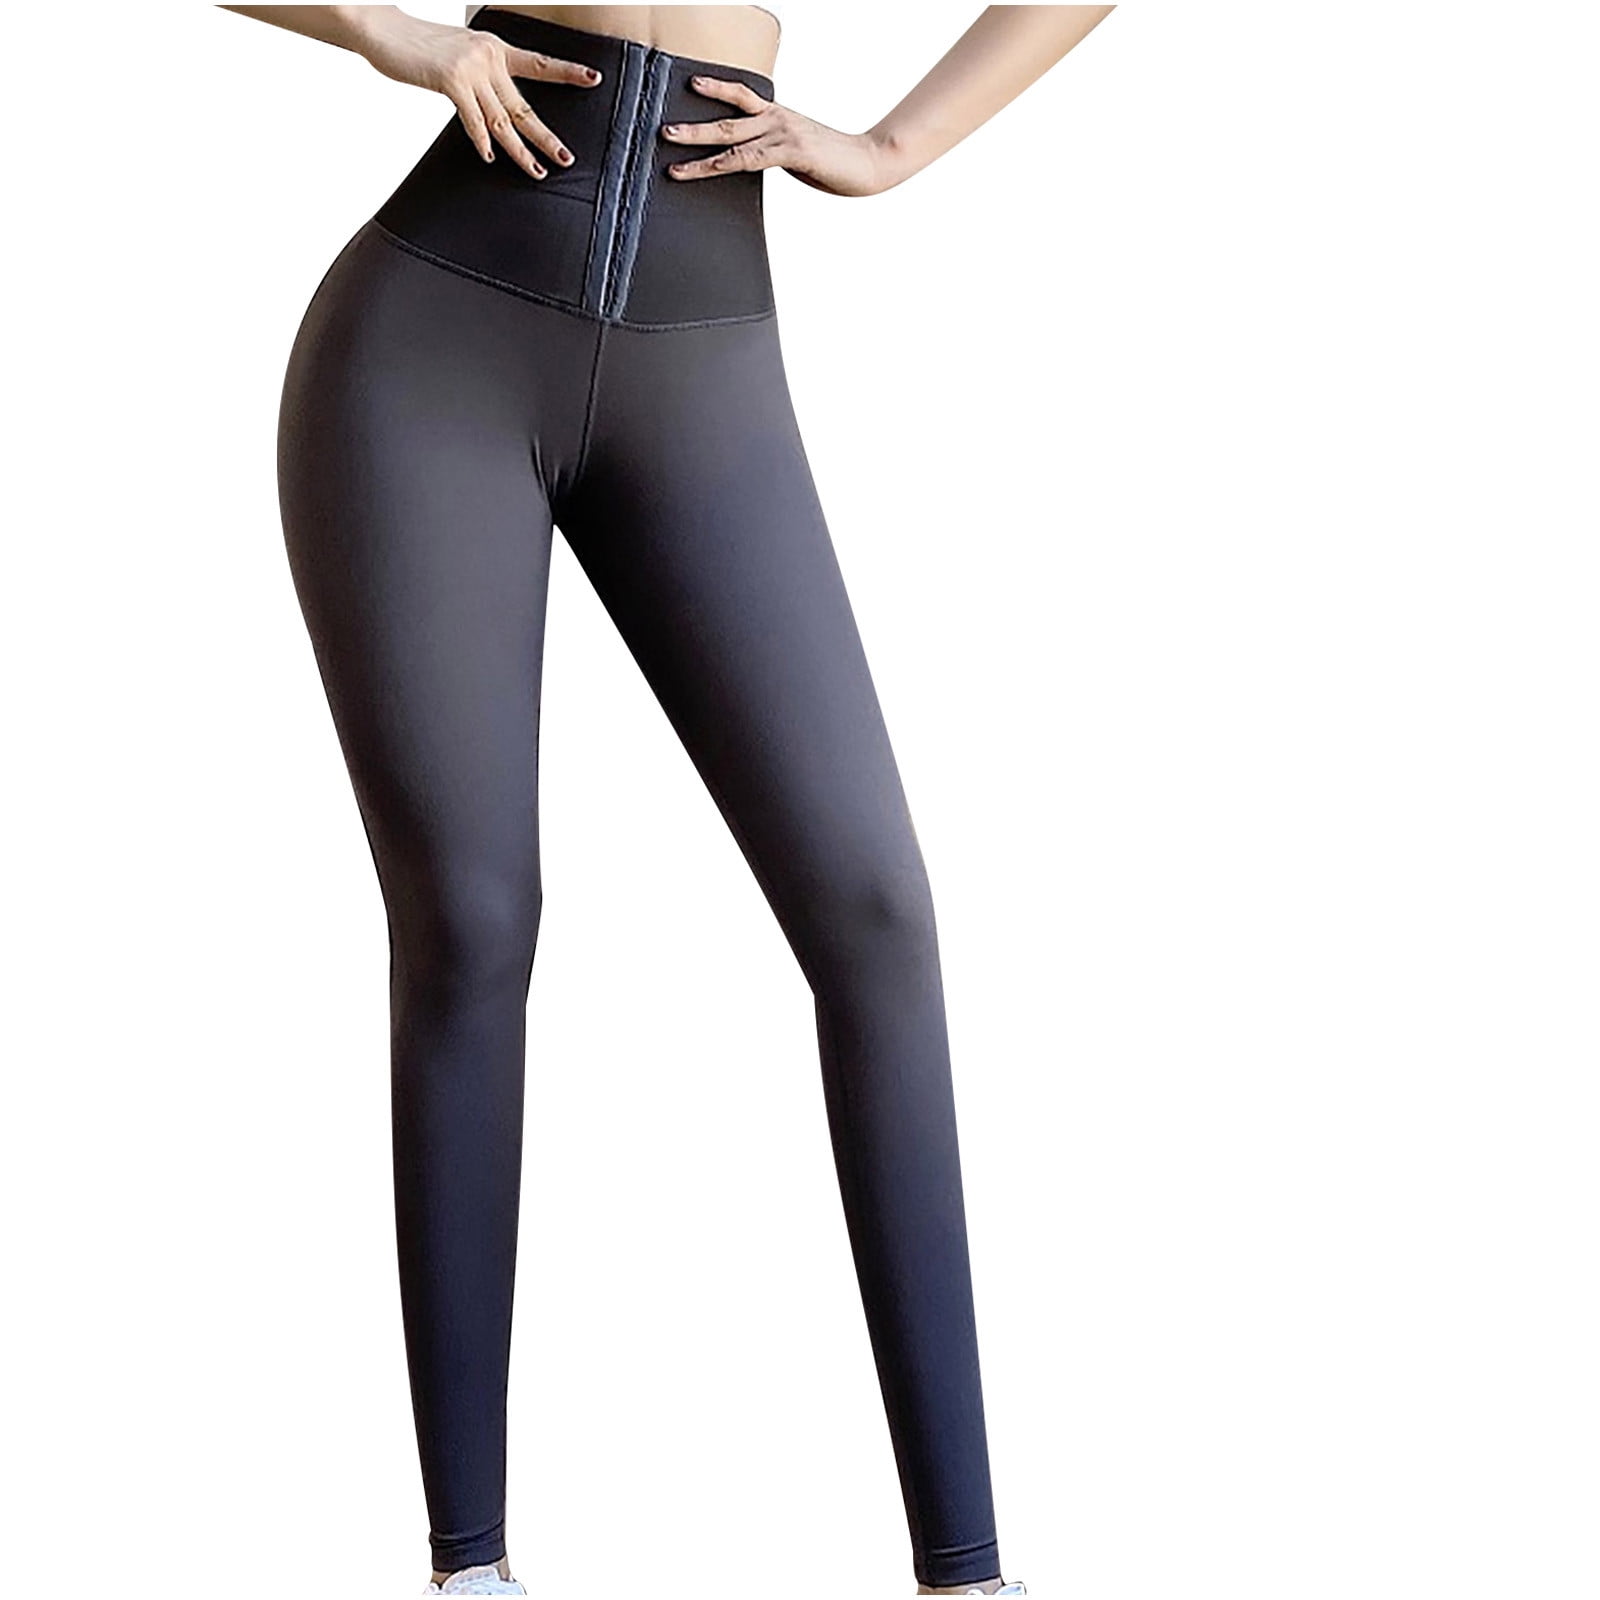 NORMOV High Waist Leather Leggings For Women Push Up Fitness Workout Hot  Yoga Pants For Sports And Style 211204 From Long01, $8.89